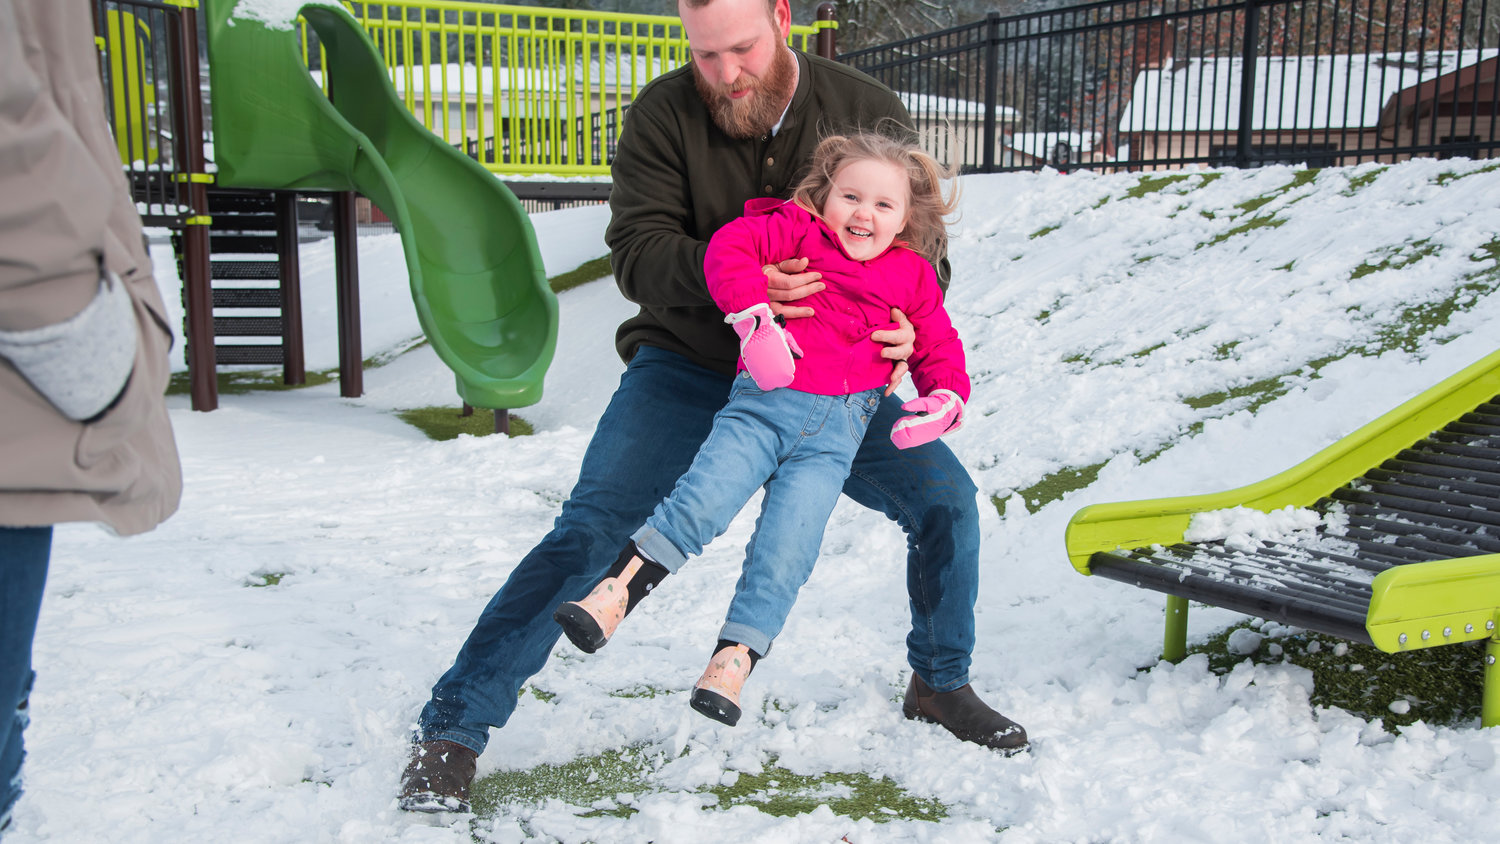 Paytynn, 3, smiles as she slides down a slide at Penny Playground Sunday in Chehalis